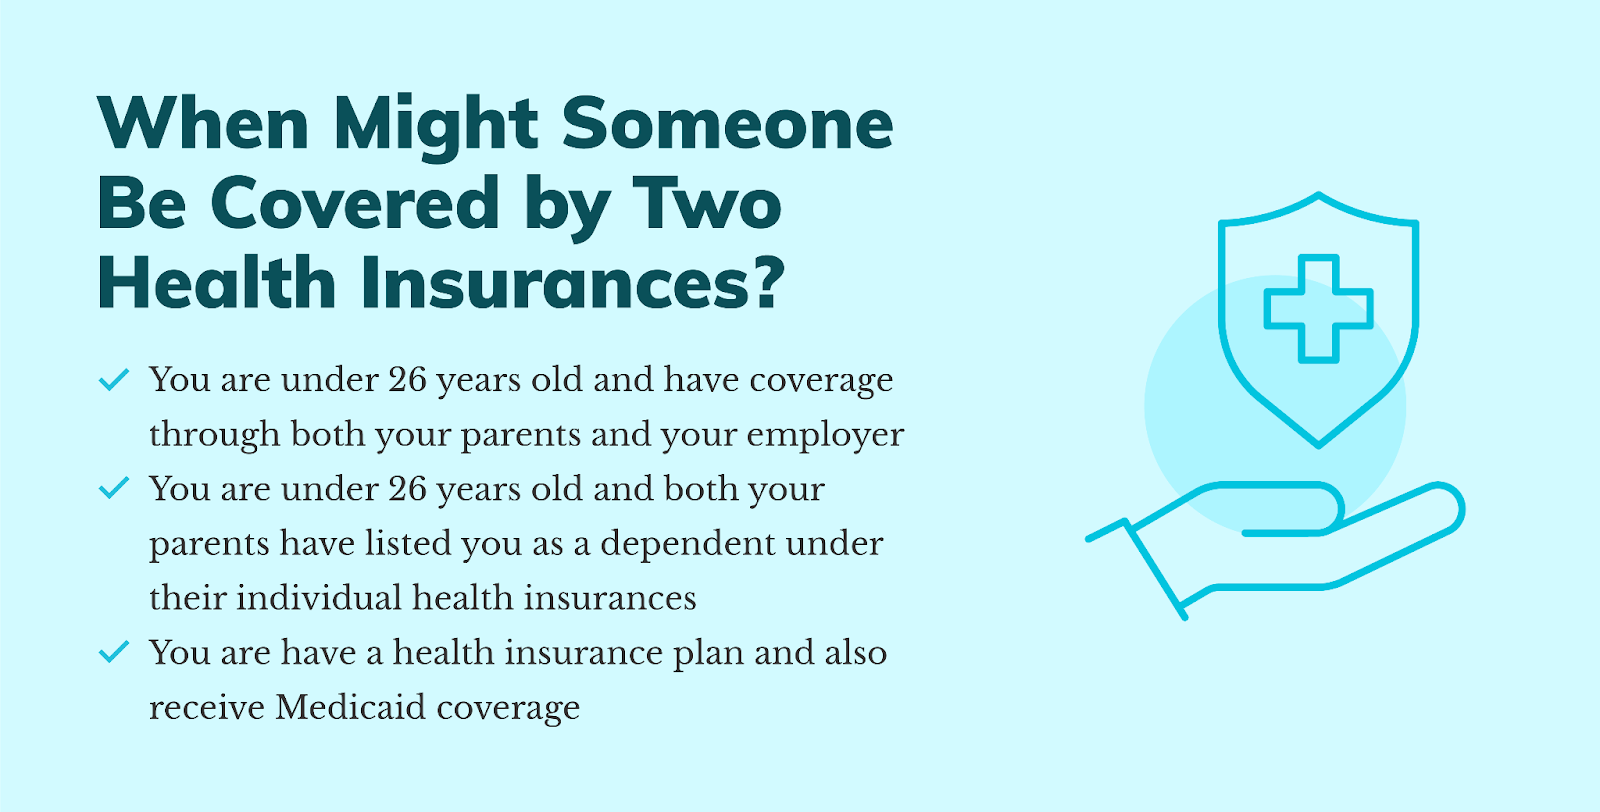 Can I have more than one health insurance plan?